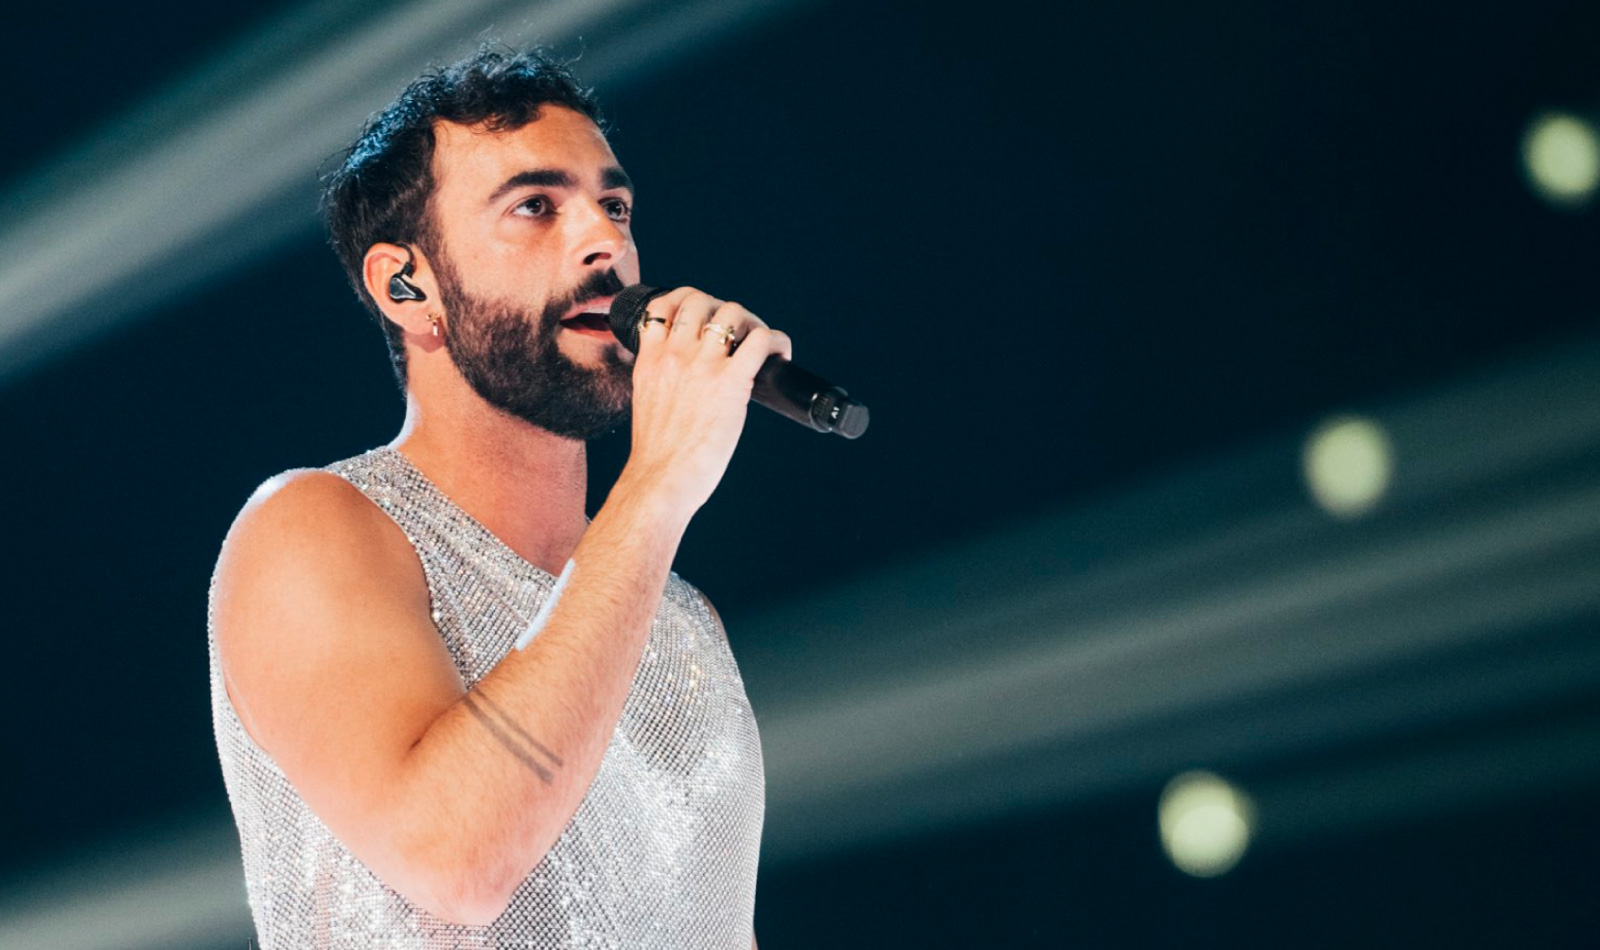 Marco Mengoni all'Eurovision 2023